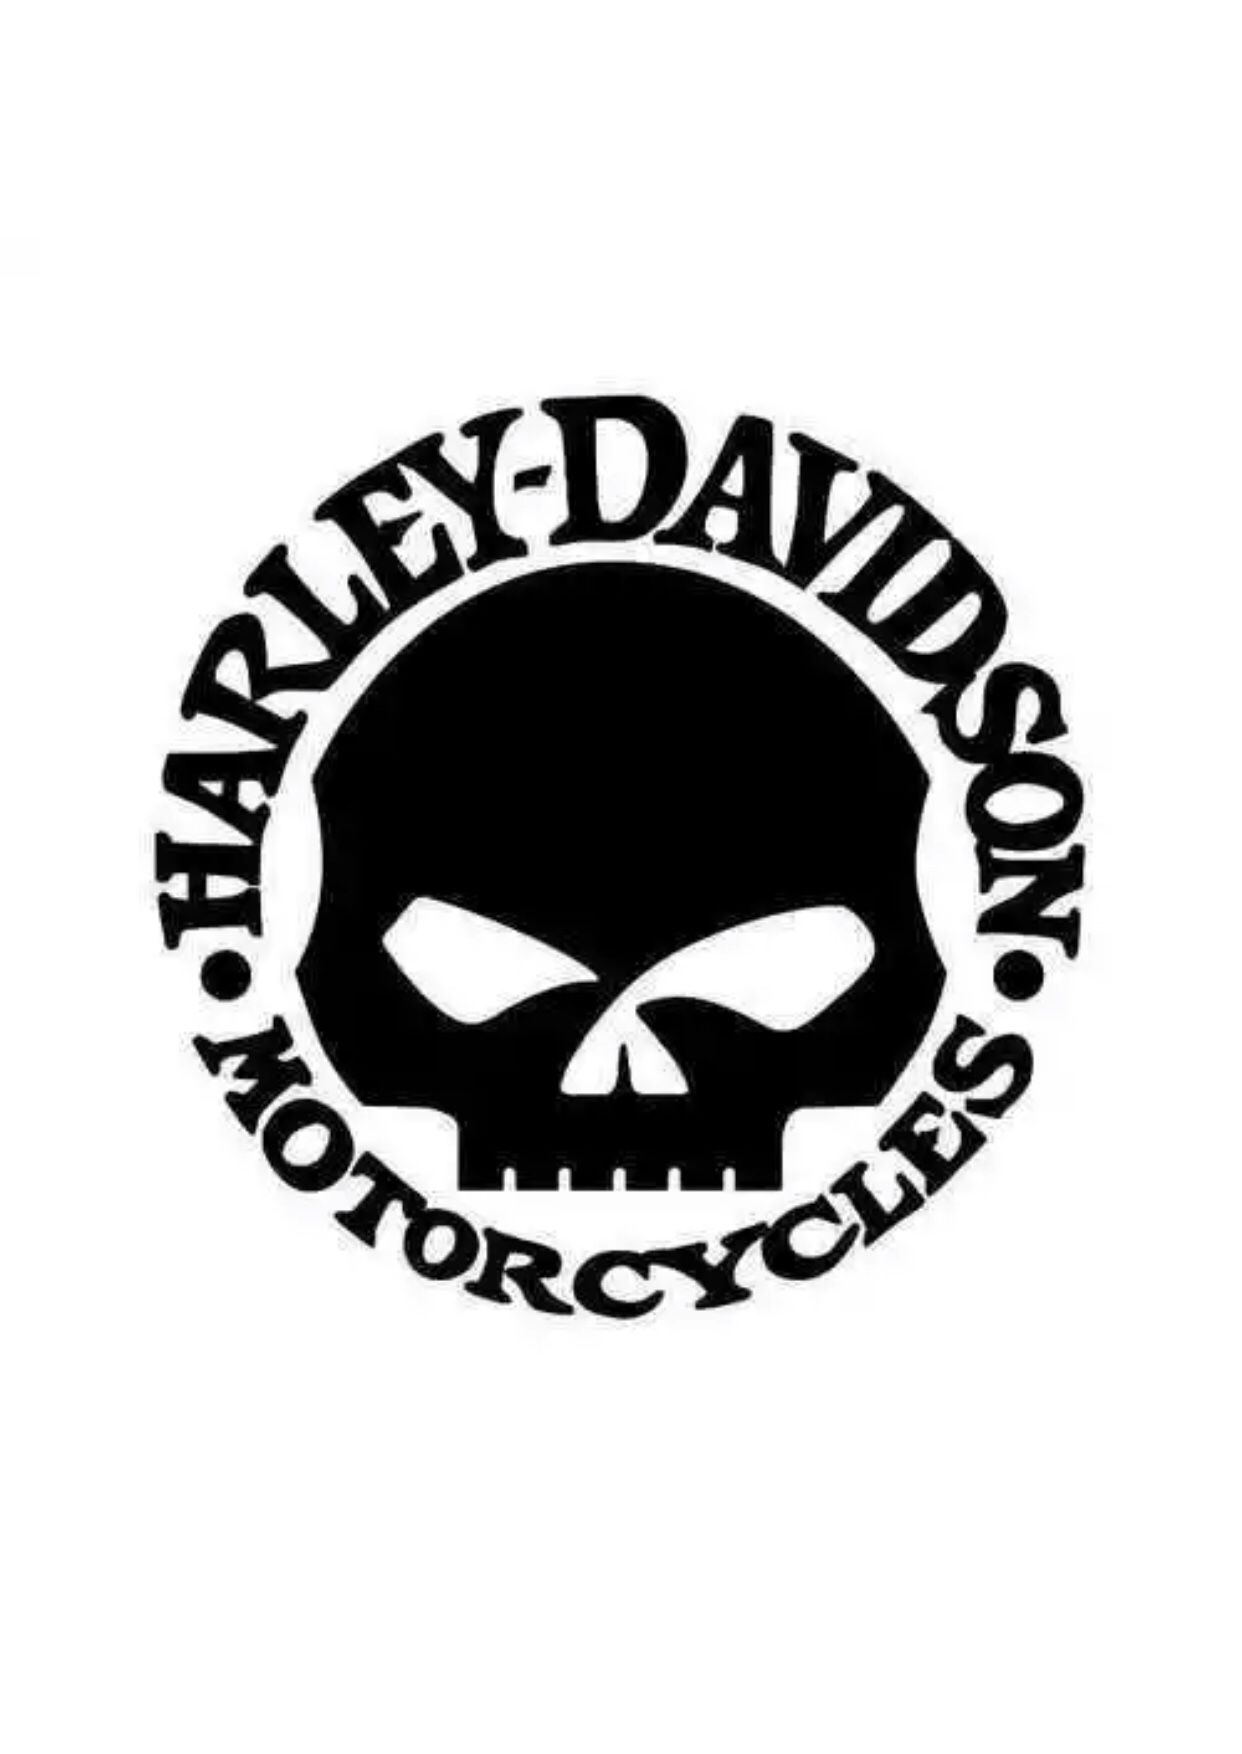 Harley Davidson decal. $5 and up